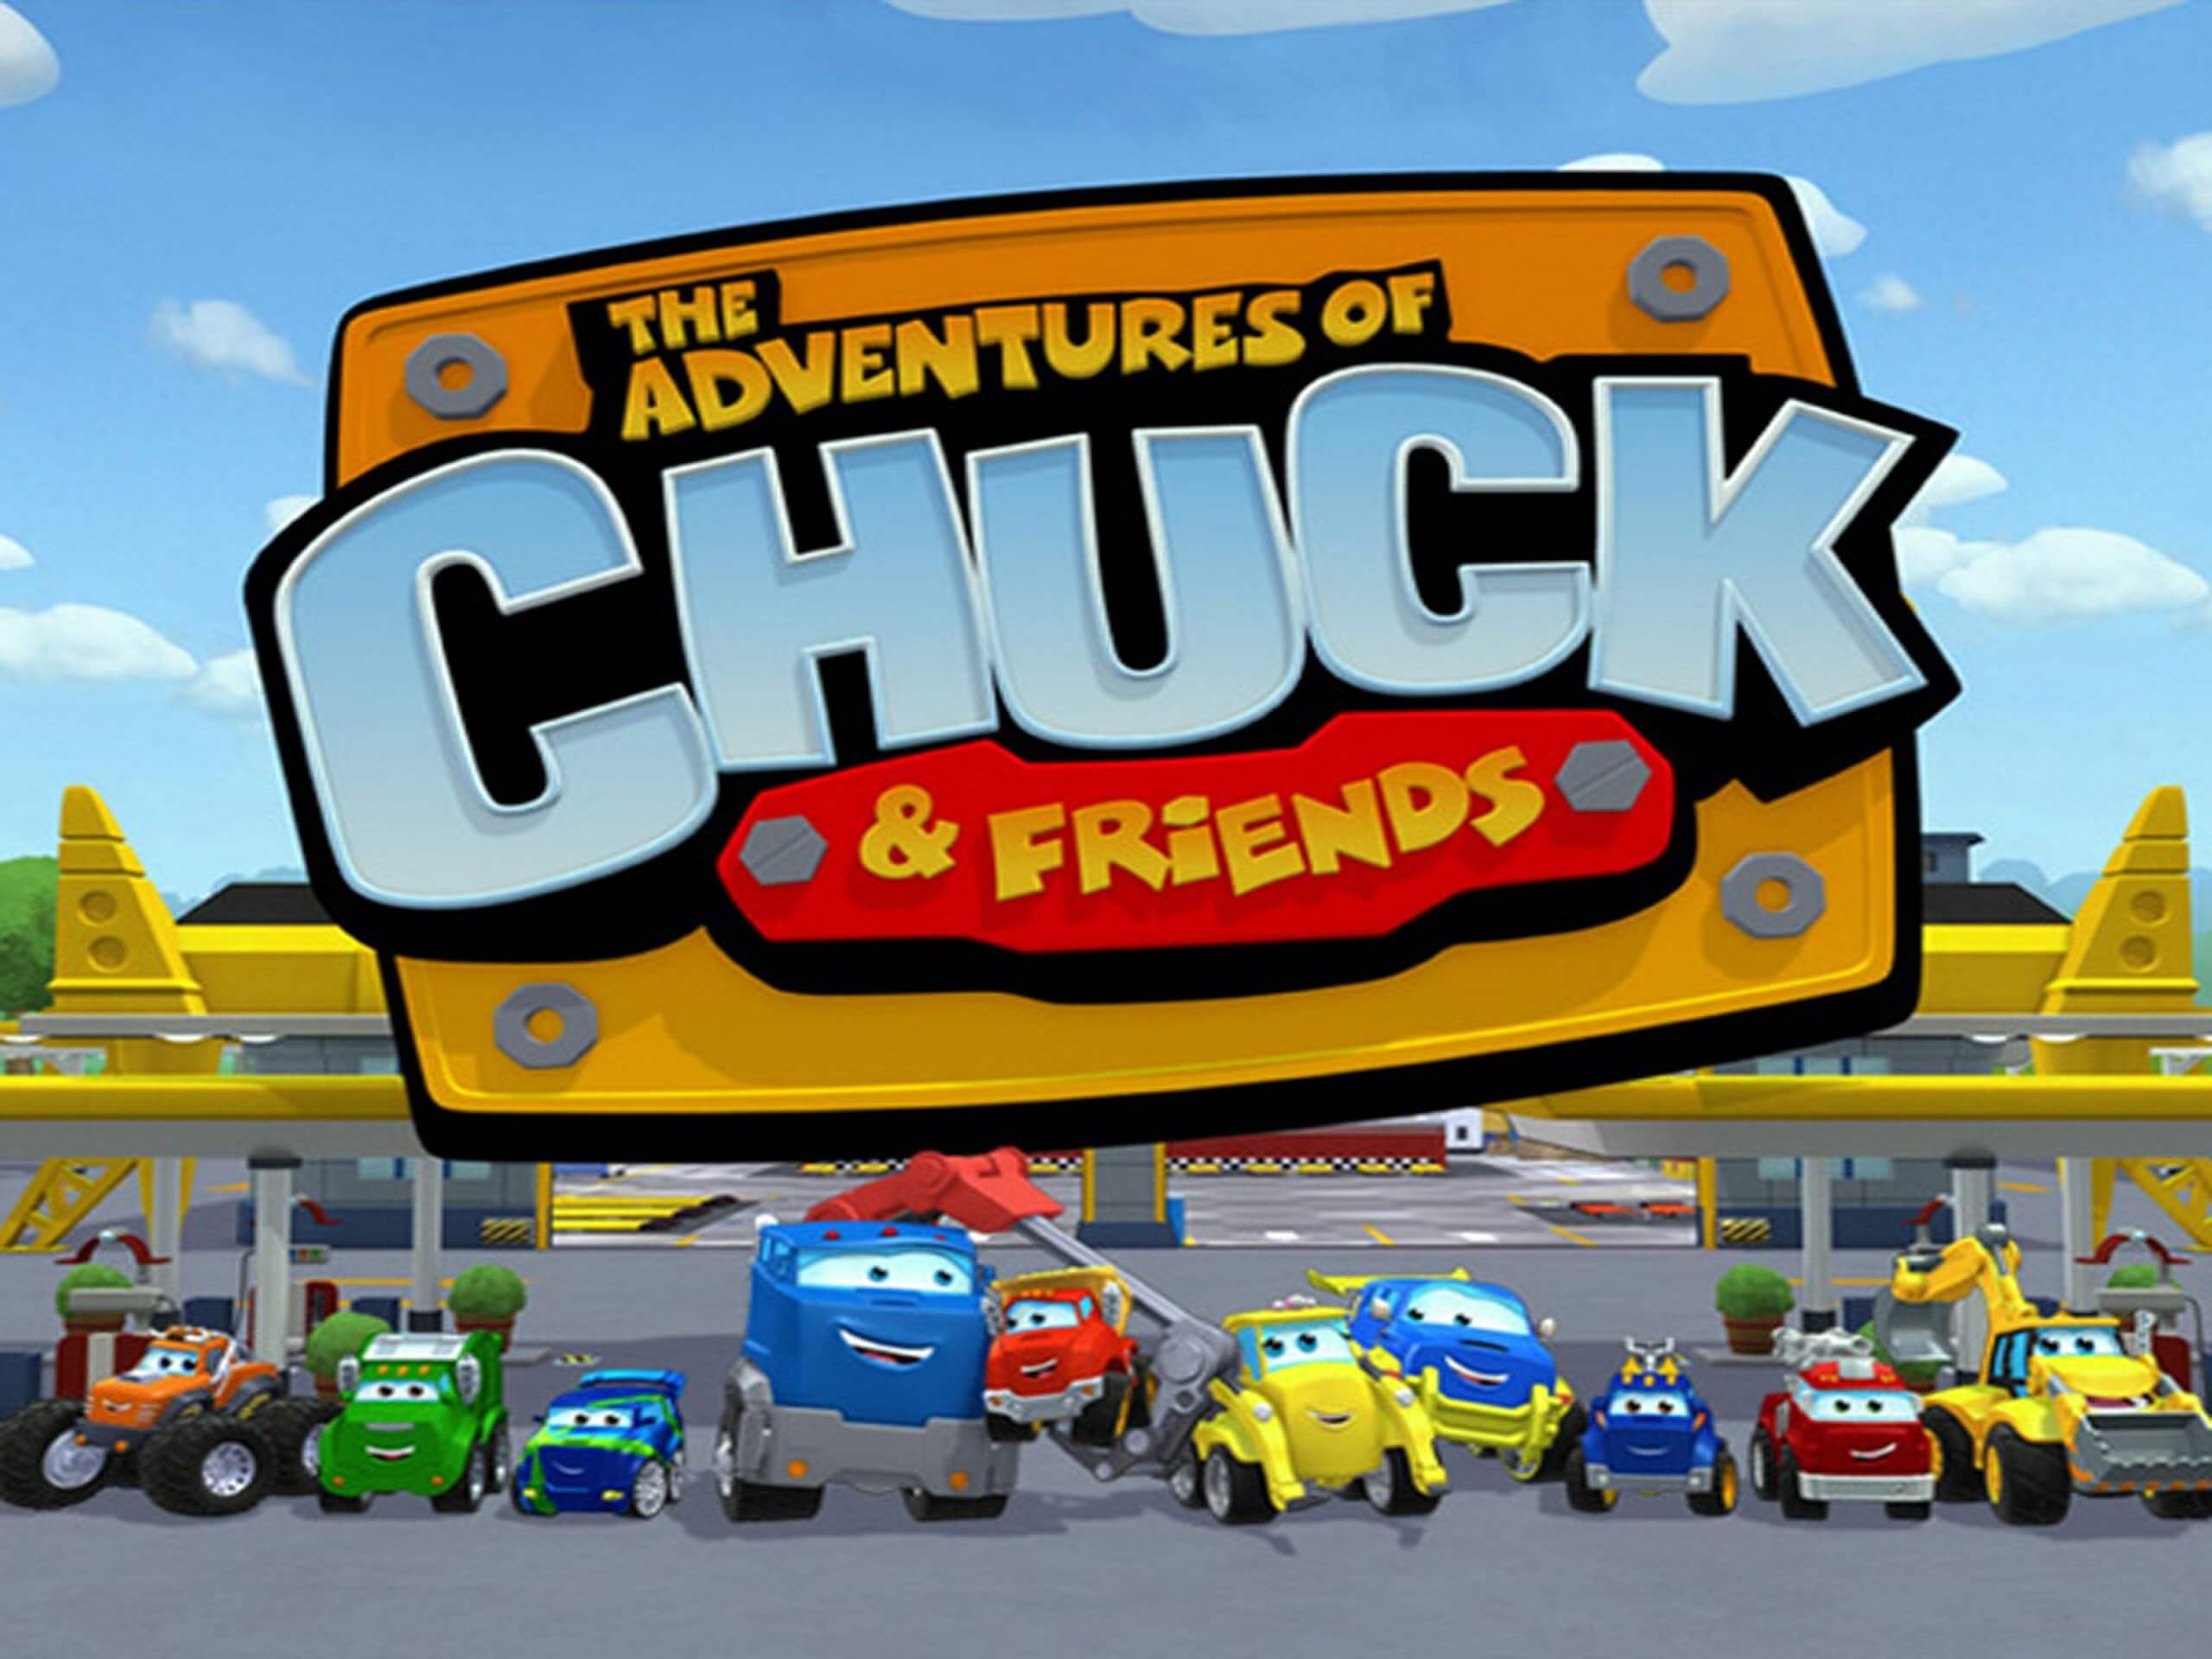 The-Adventures-of-Chuck-and-Friends-directv-shows